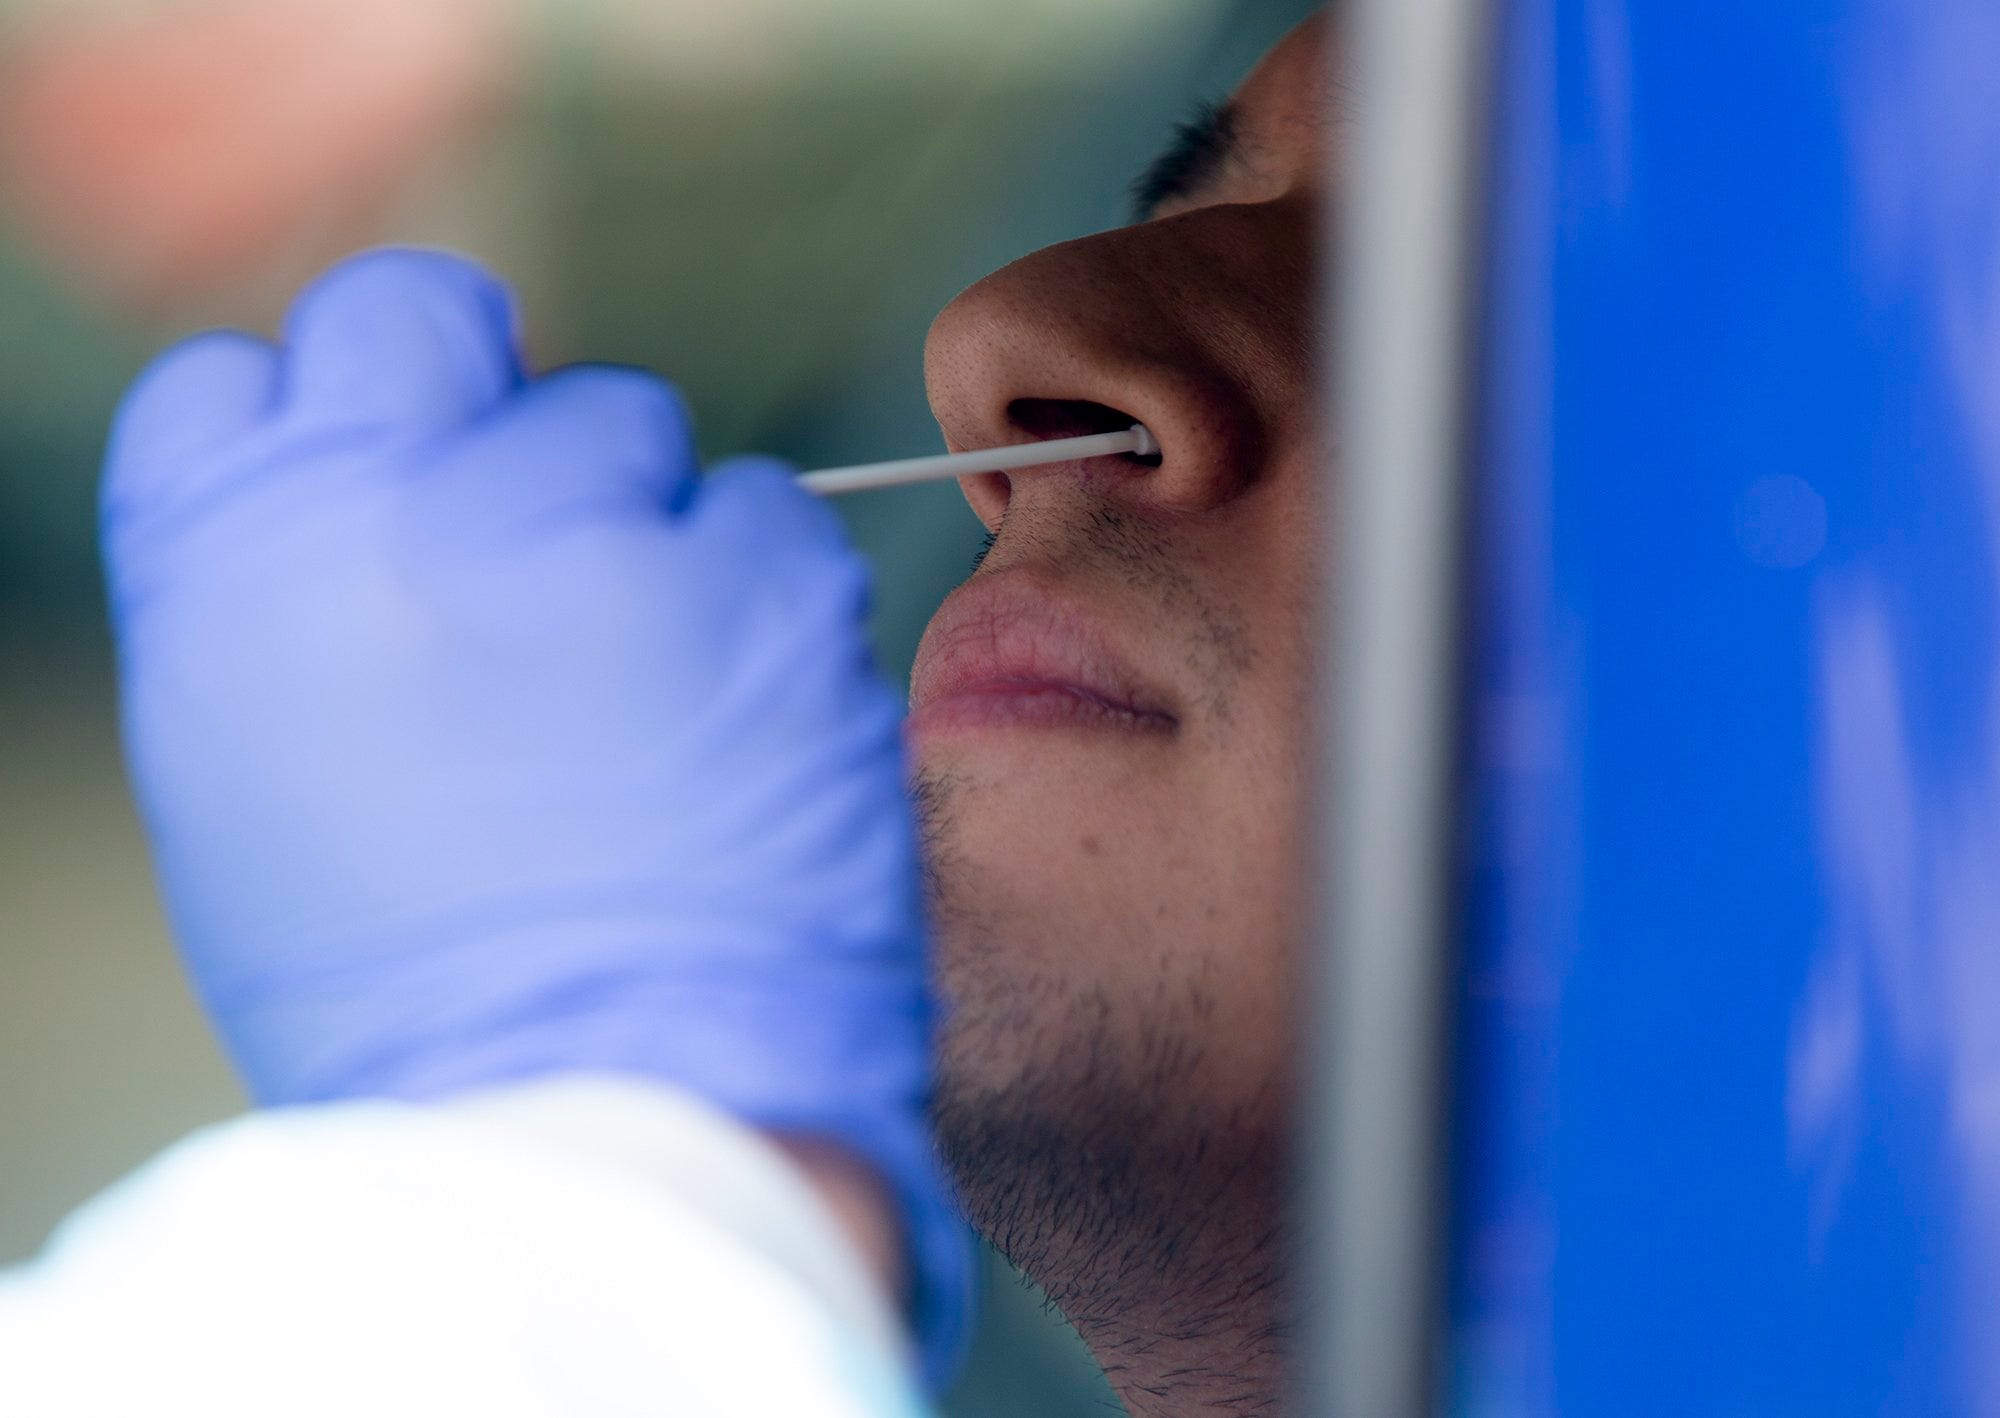 Javier Treviño, a licensed vocational nurse, tests a man for COVID-19 at Austin Regional Clinic Far West's drive-through testing on May 27, 2020. The drive-through saw more than 40 people that day.